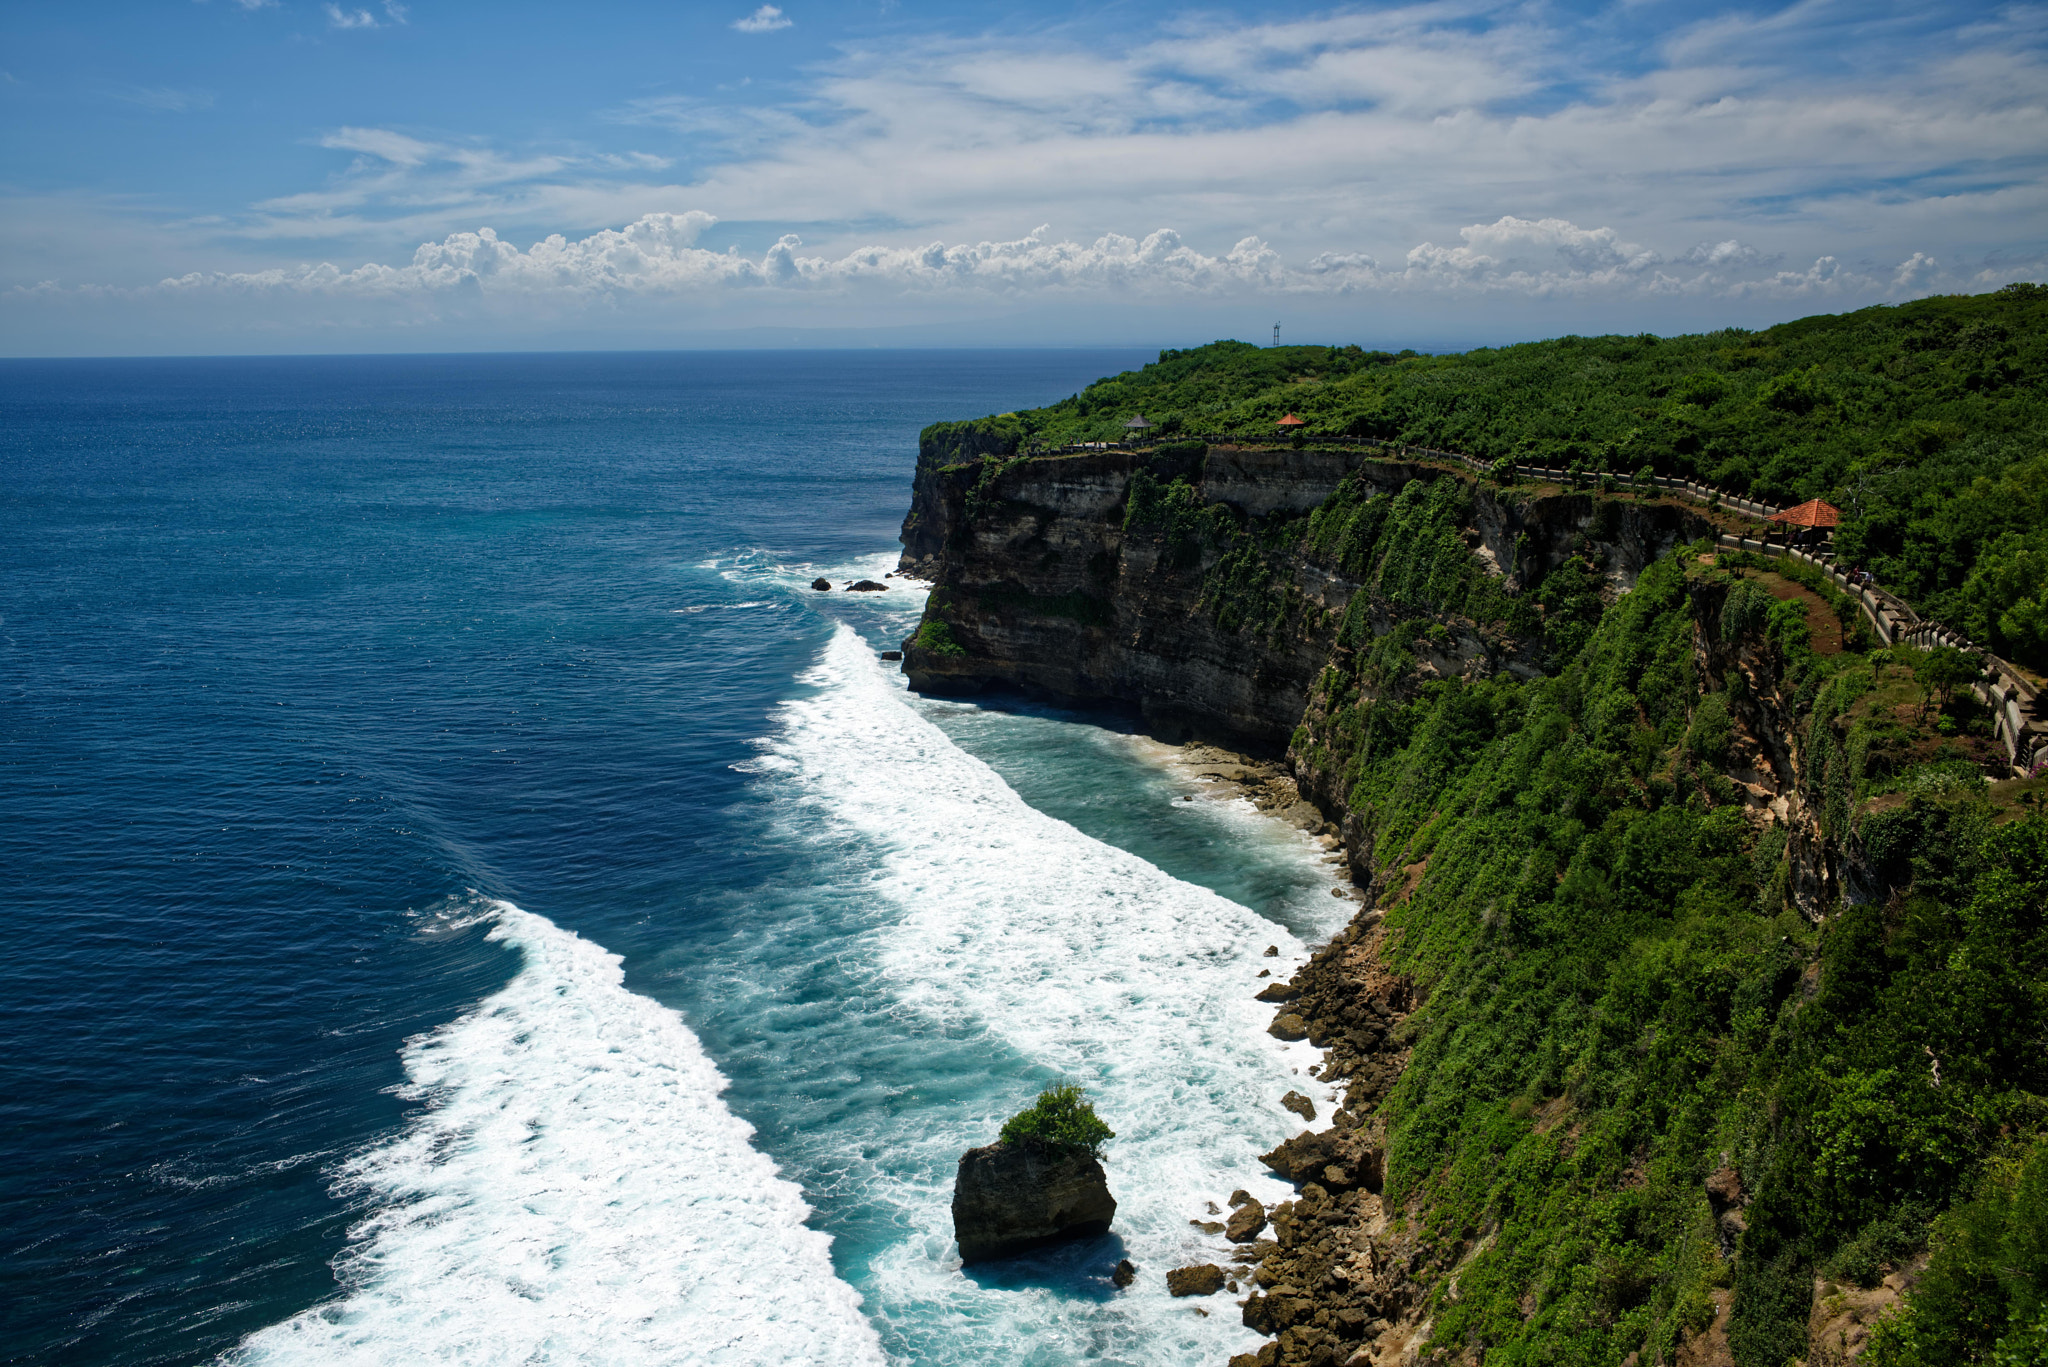 ZEISS Distagon T* 25mm F2.8 sample photo. Bali coast photography